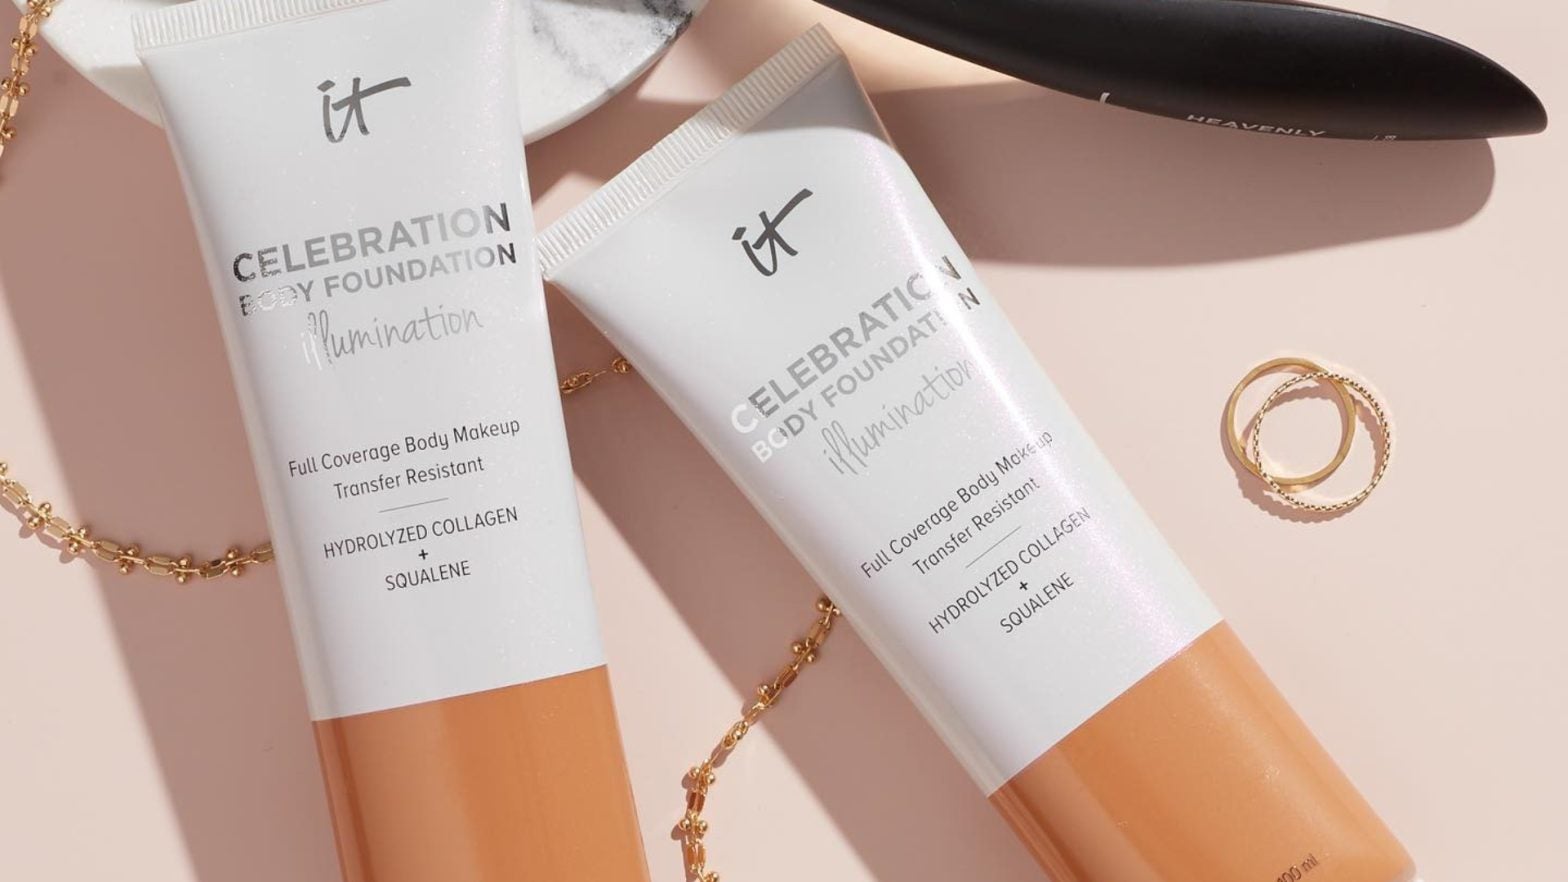 IT Cosmetics’ New Celebration Body Foundation Leaves You With A Flawless Finish That Isn’t Just For The Face